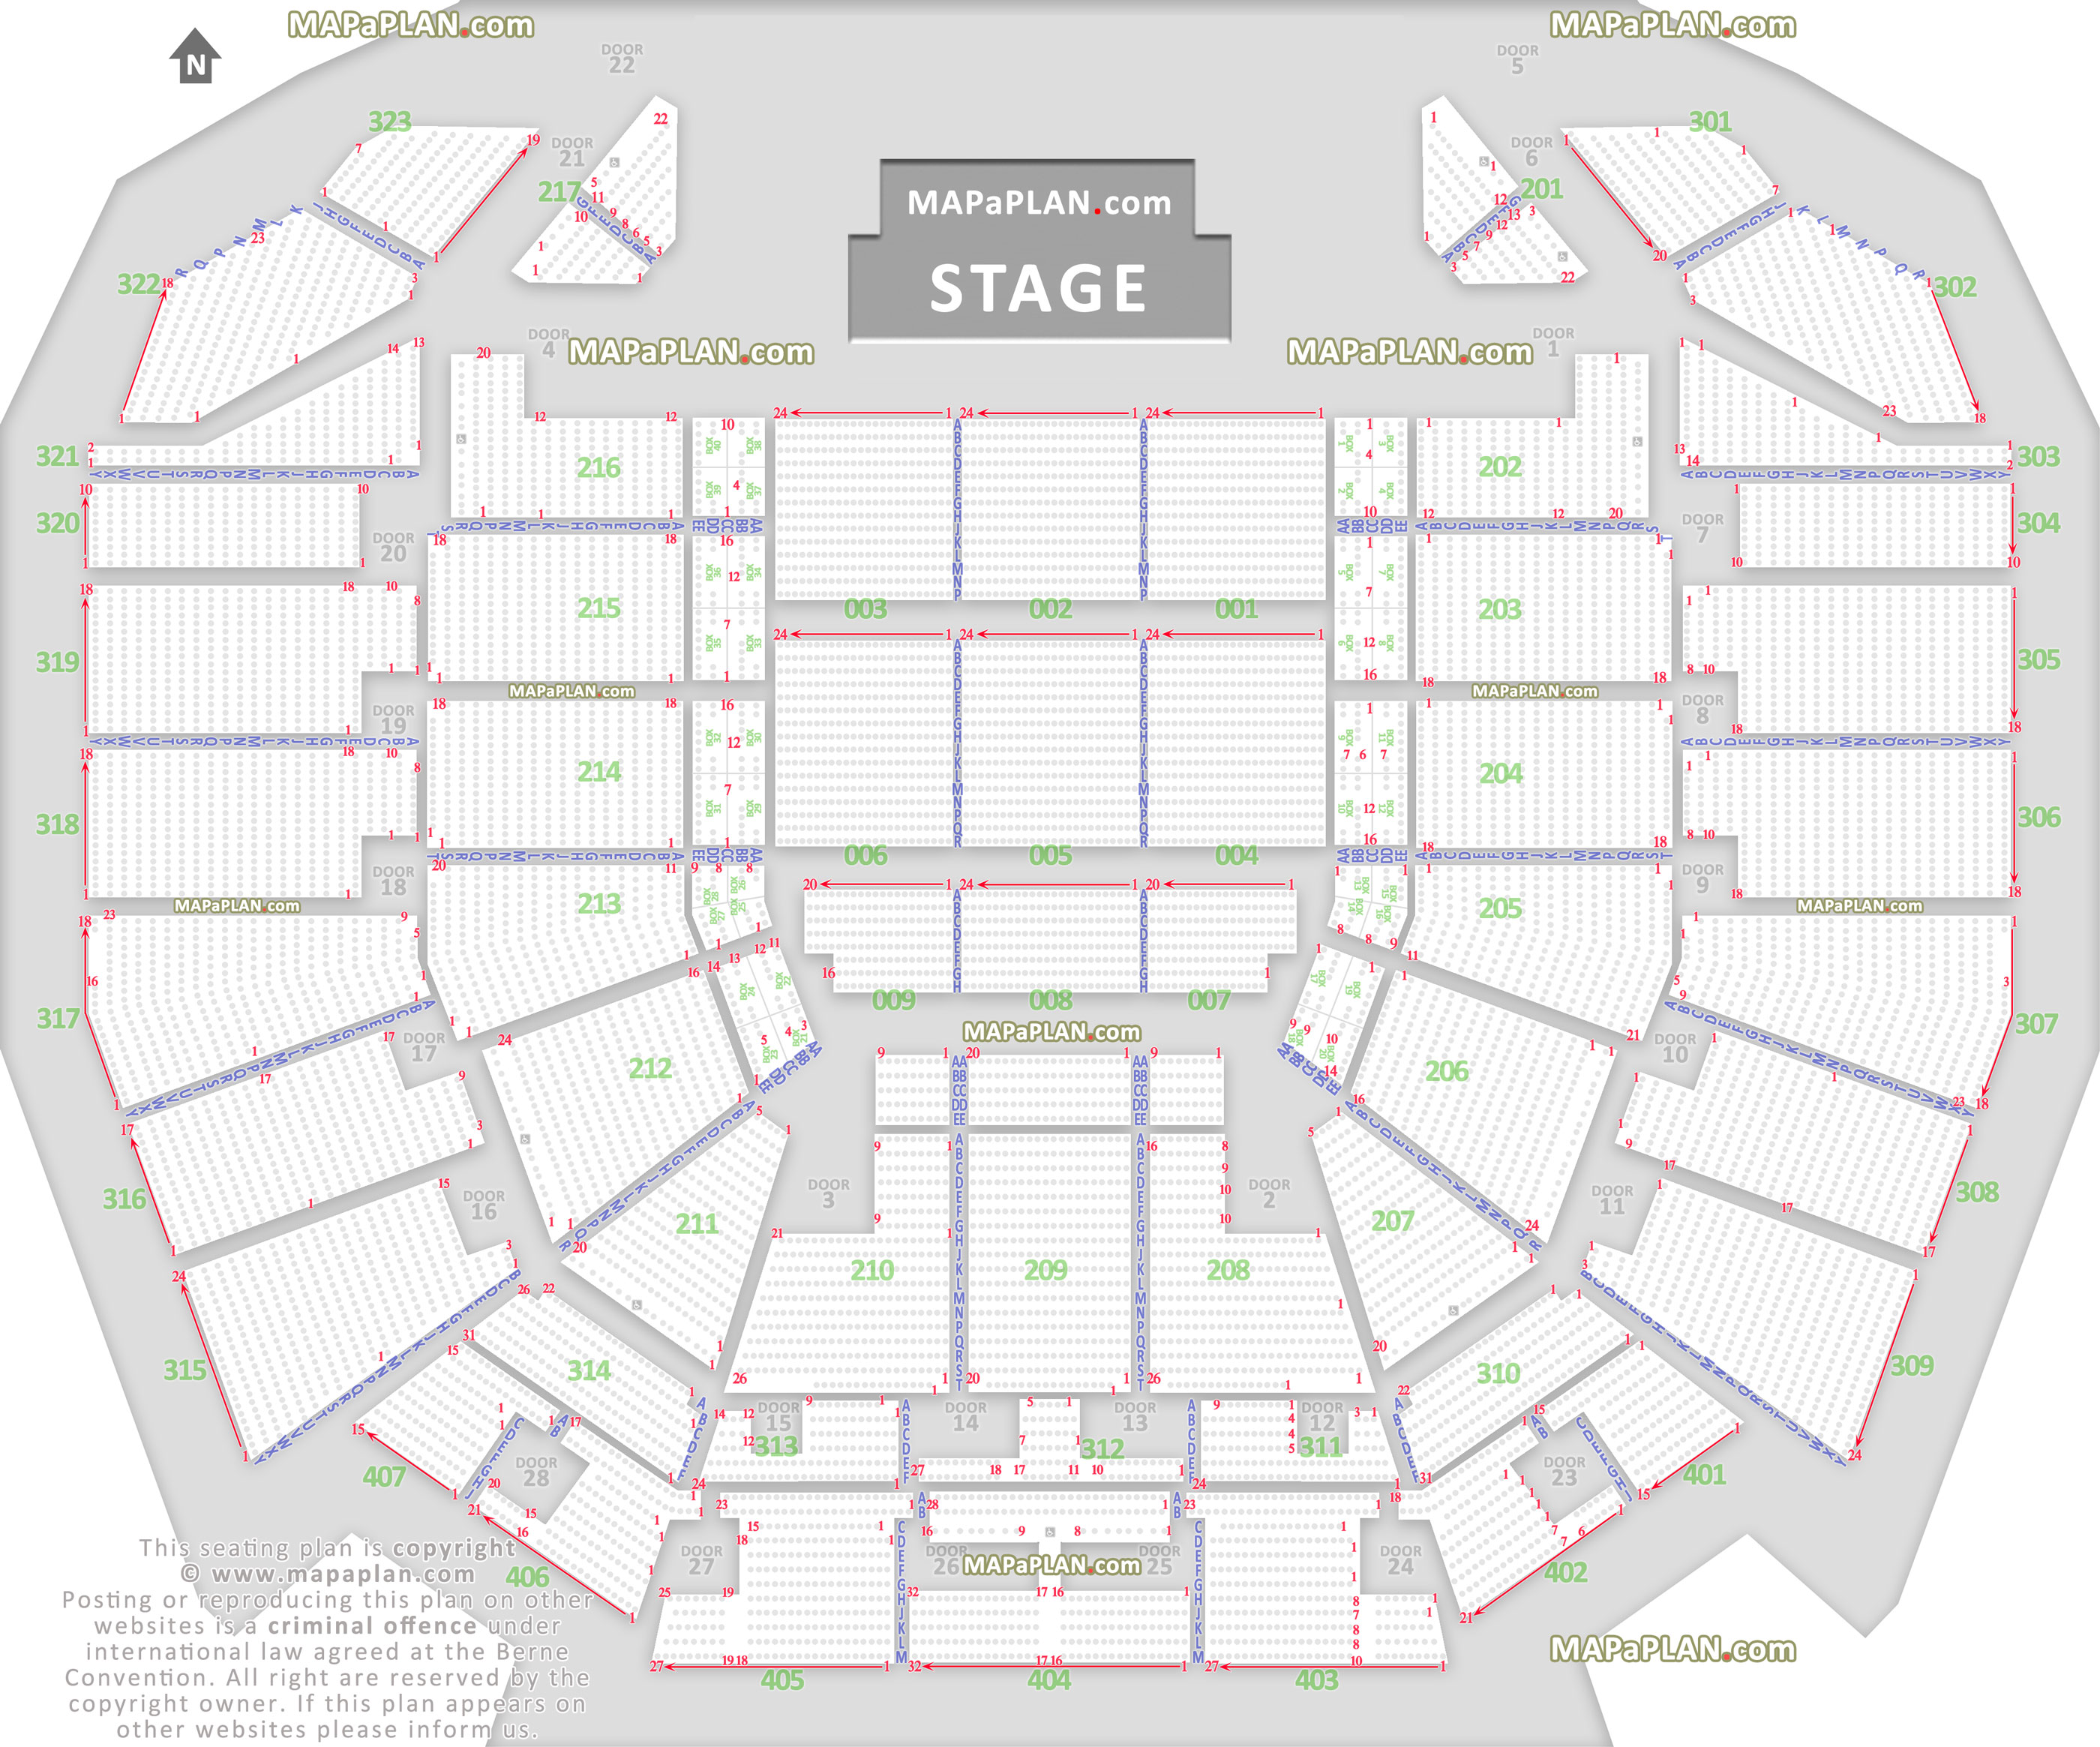 detailed seat row numbers concert chart with floor lower upper tier levels layout Perth RAC Arena seating plan